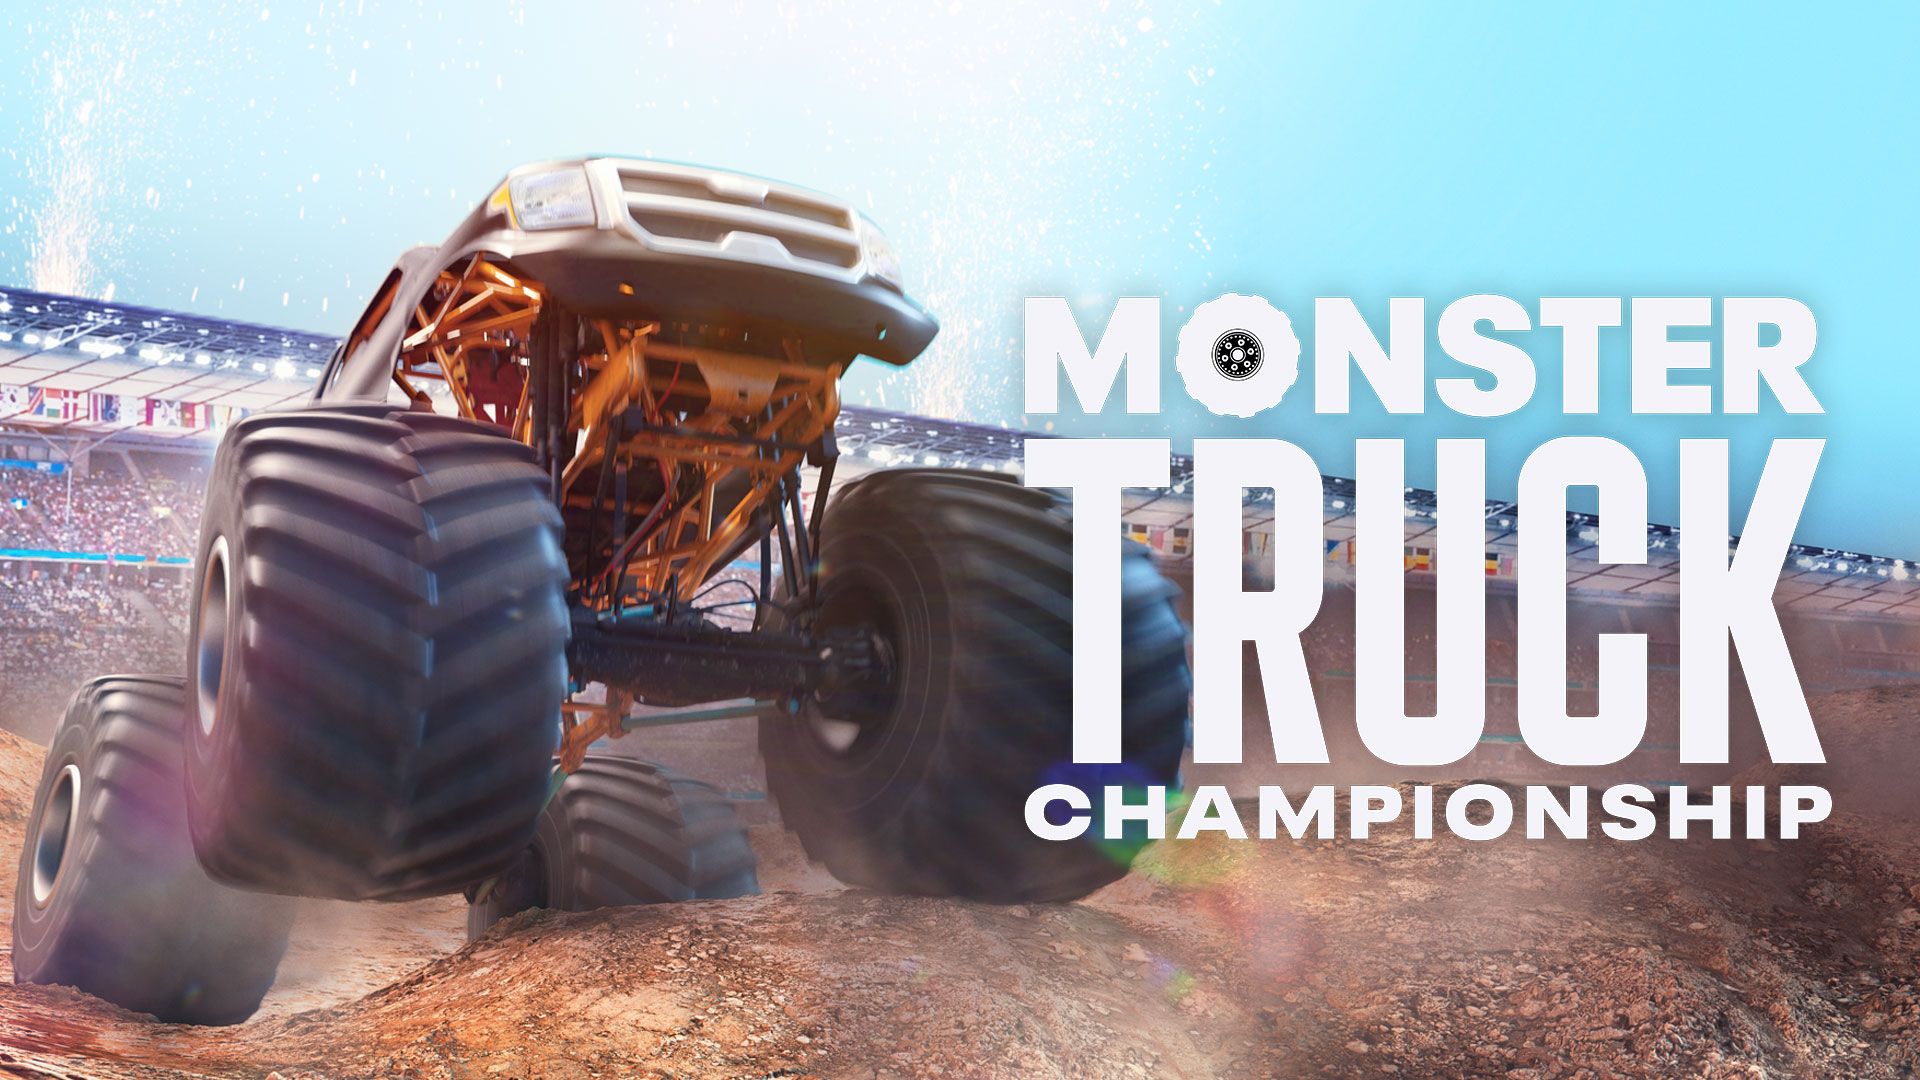 Monster Truck Championship for Nintendo Switch Game Details